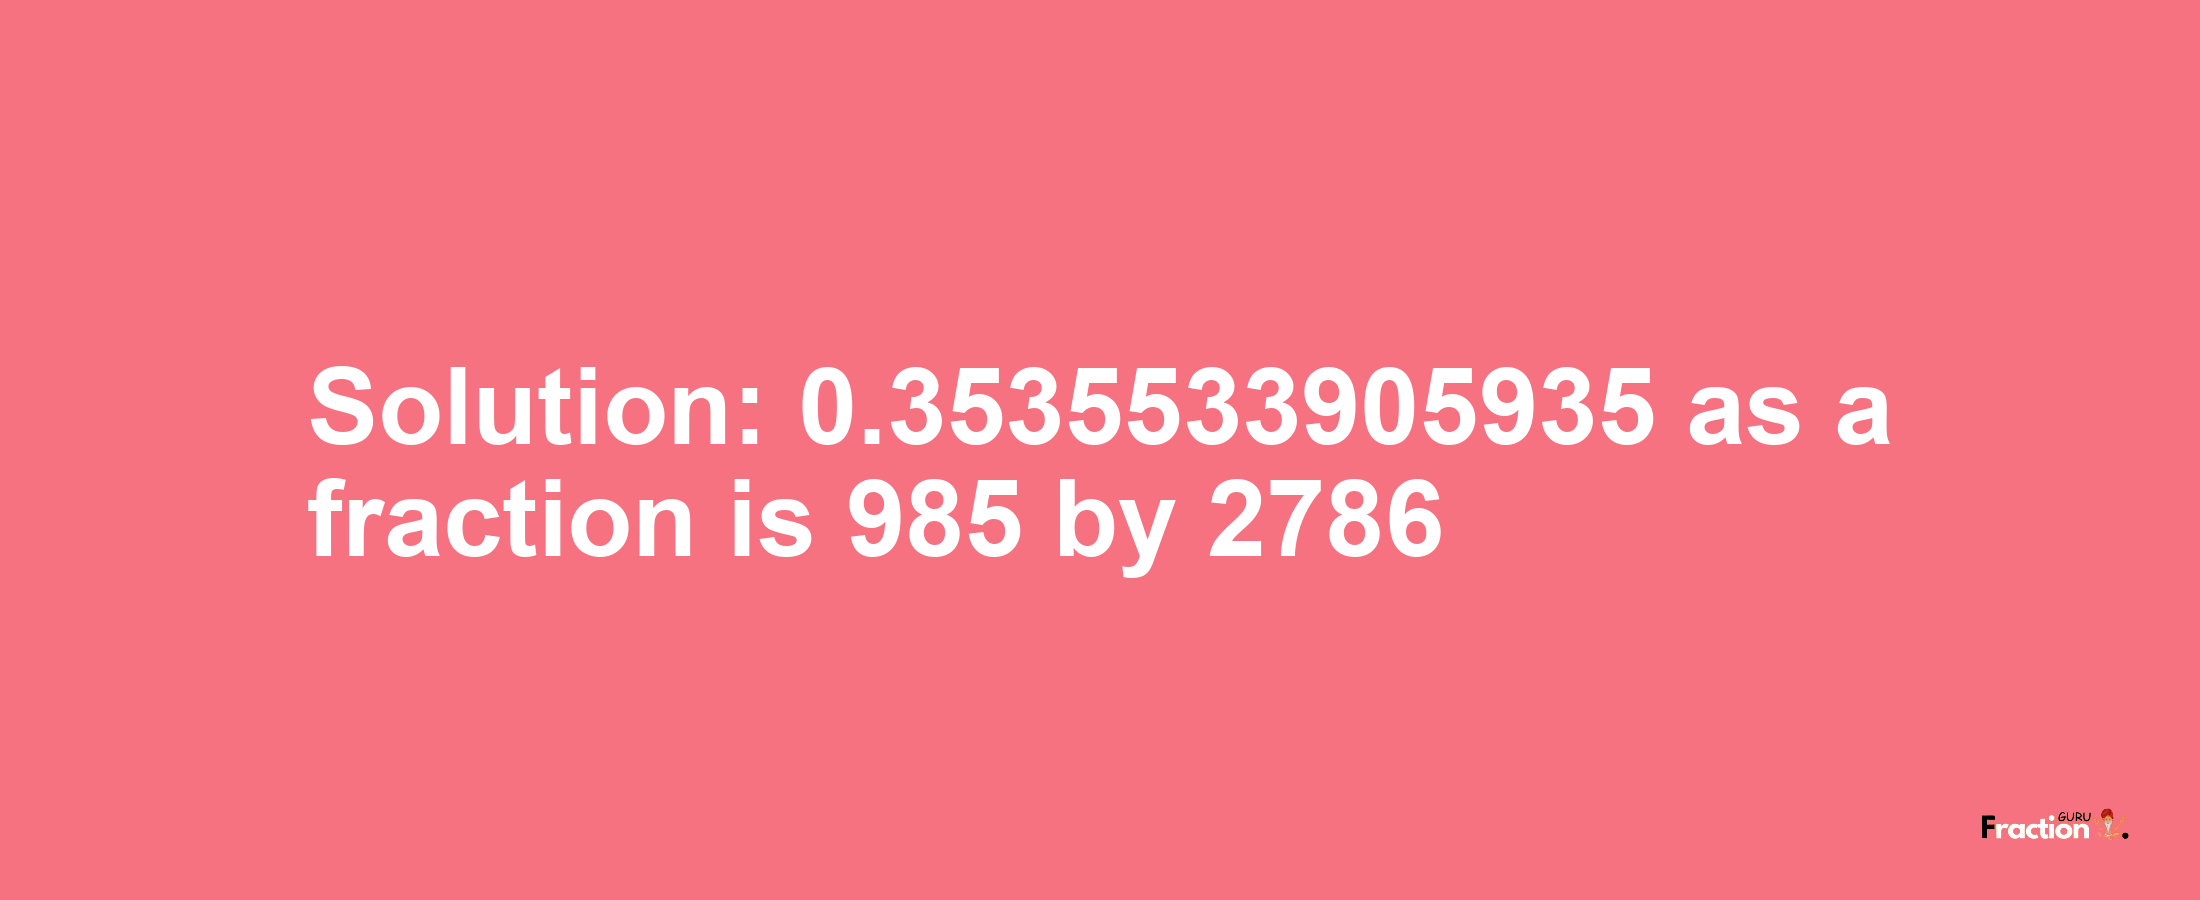 Solution:0.3535533905935 as a fraction is 985/2786